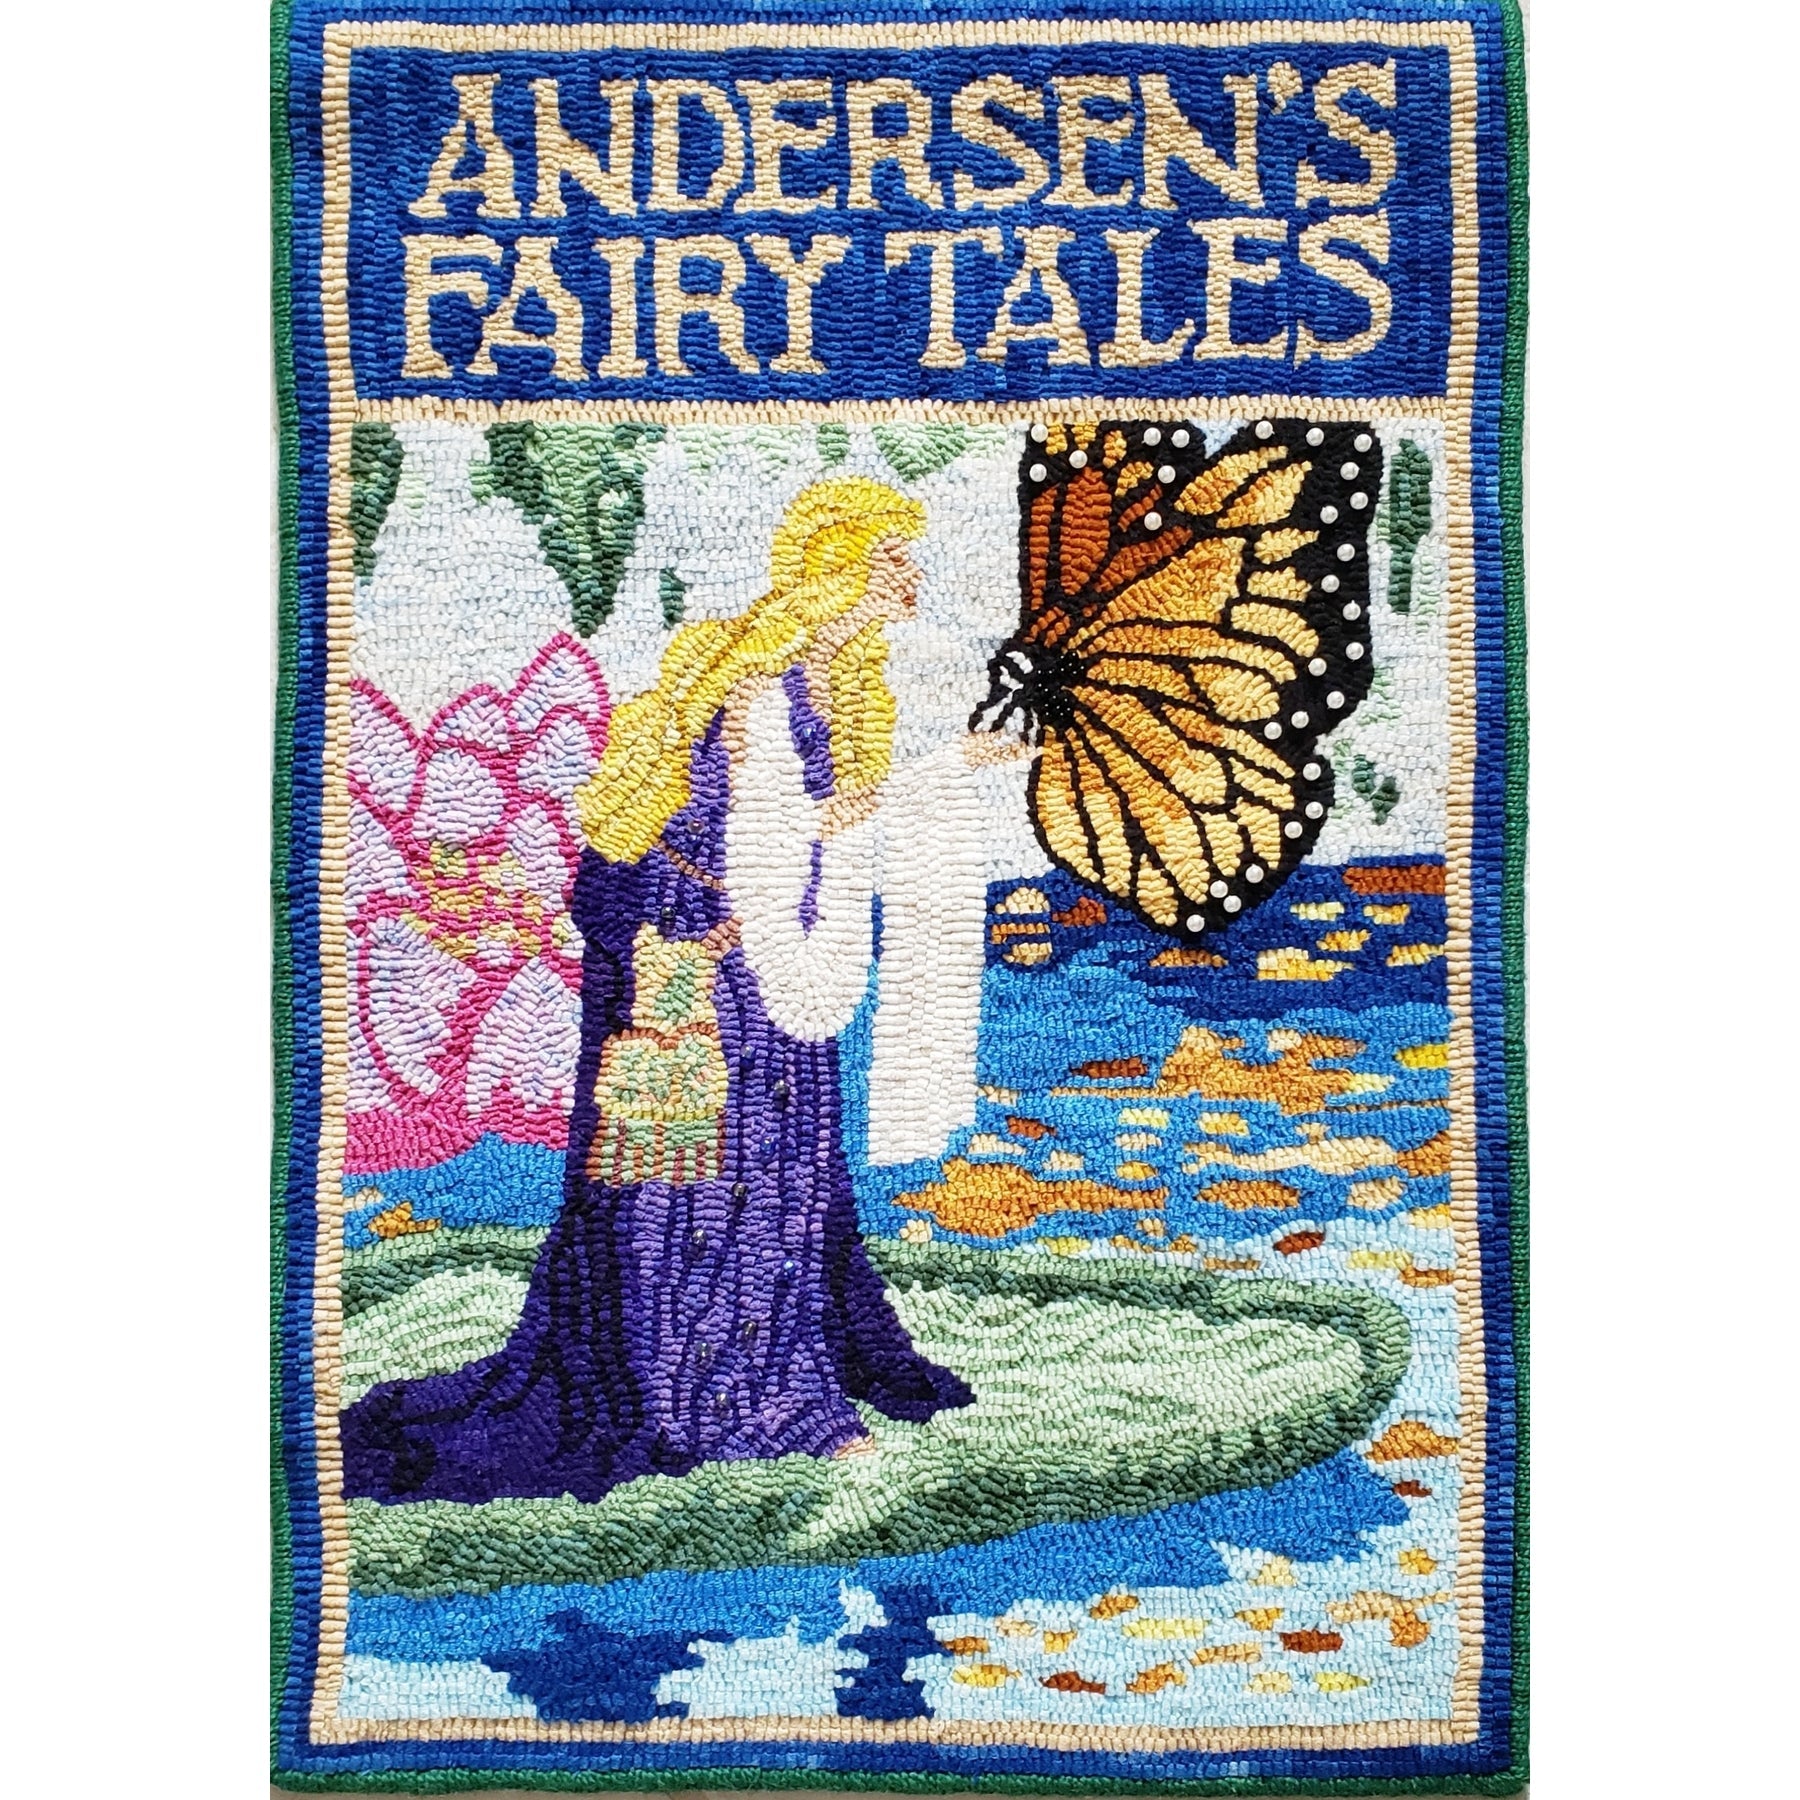 Fairy Tale Cover, ill. Mila Winter, 1916, rug hooked by Donna Martin